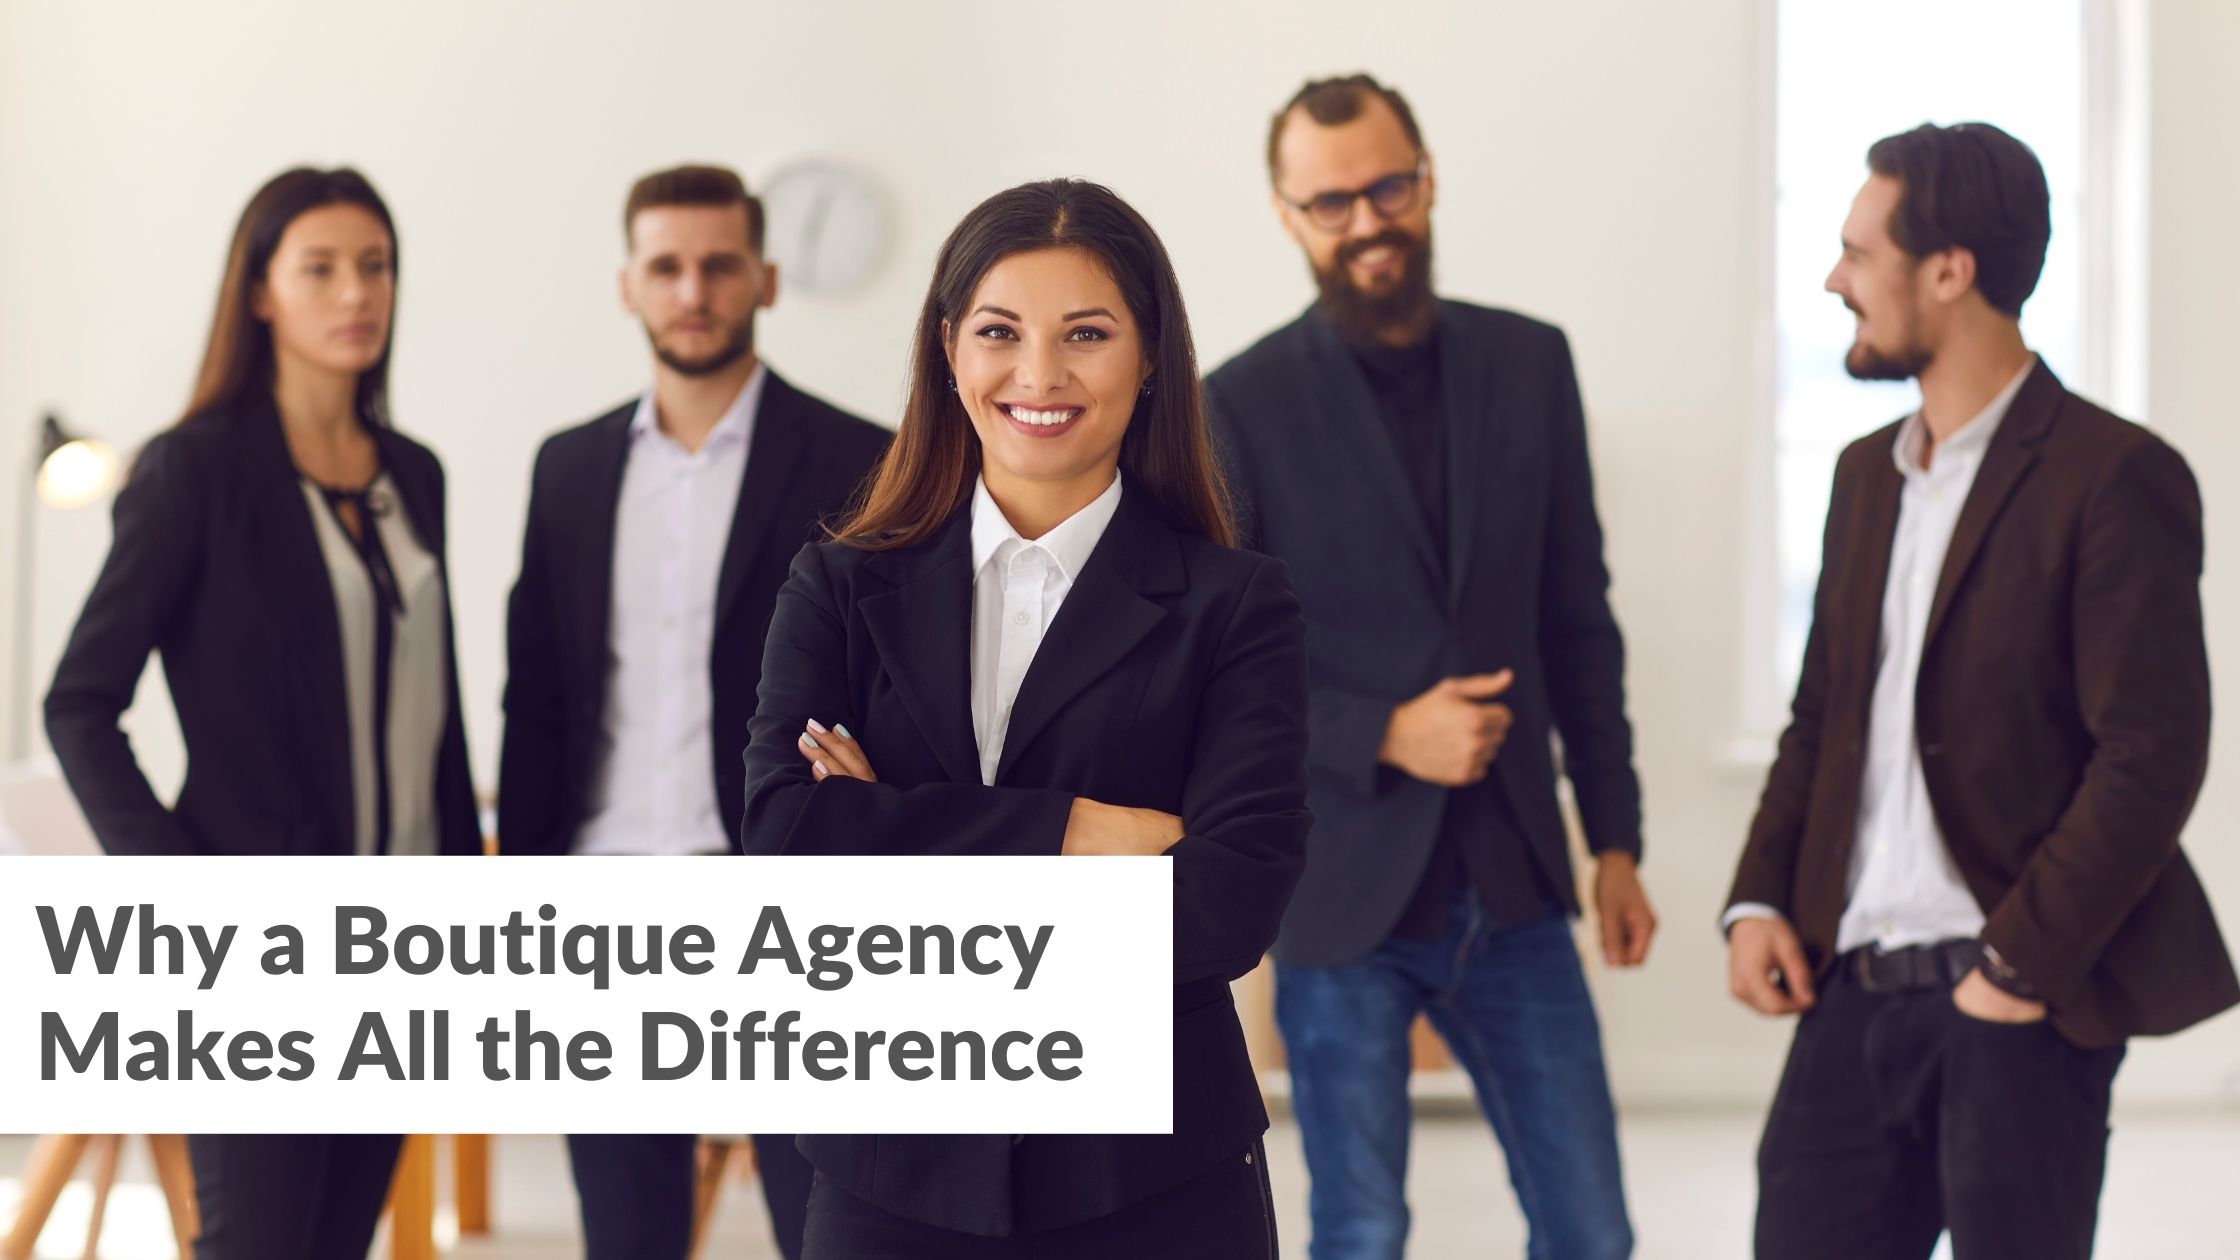 Why a Boutique Agency Makes All the Difference